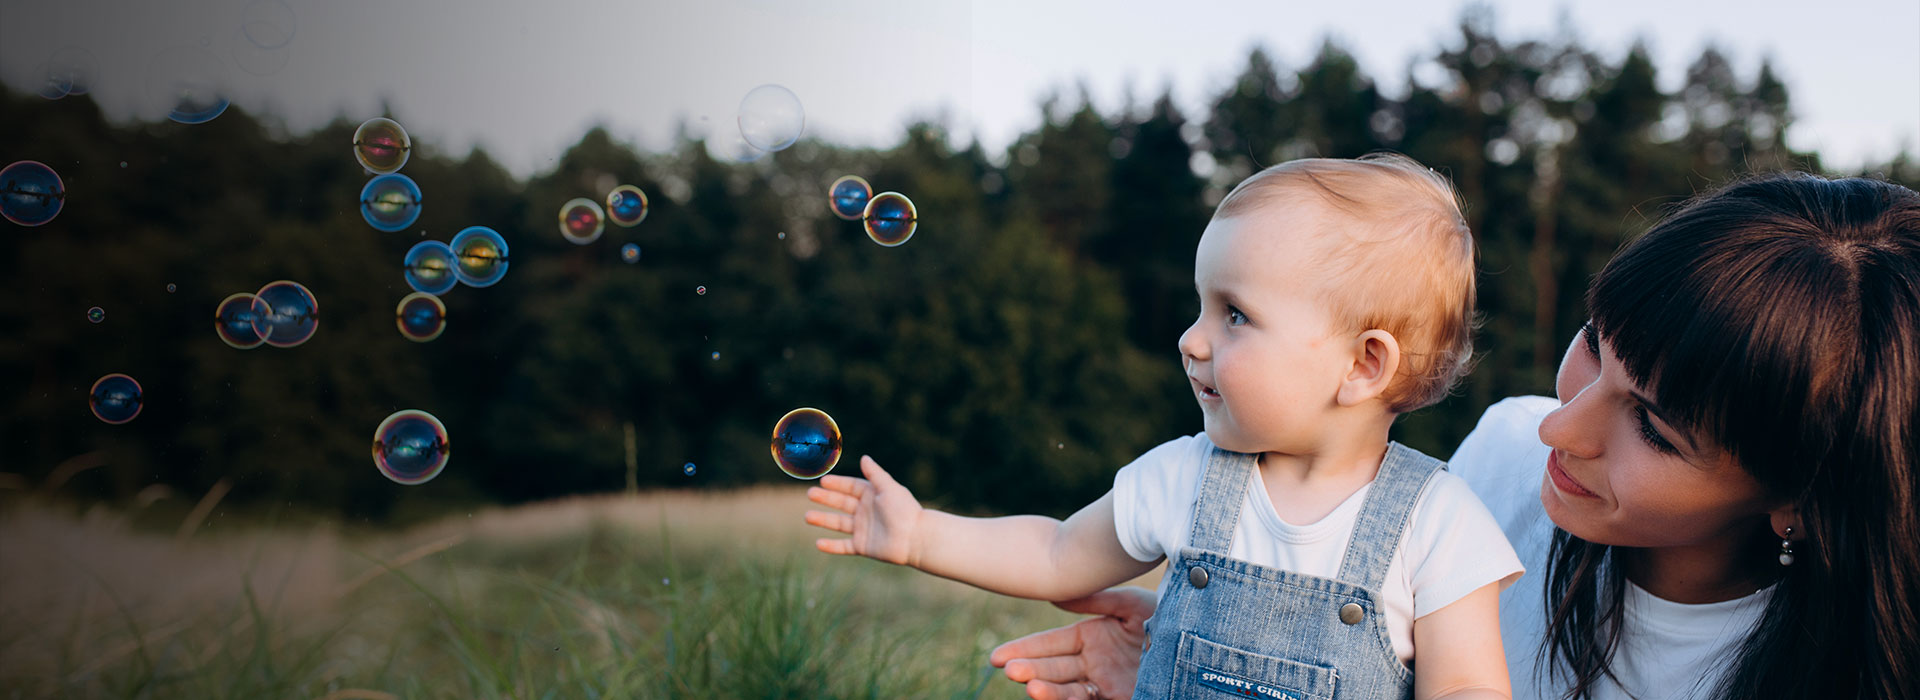 Baby Playing With Bubbles